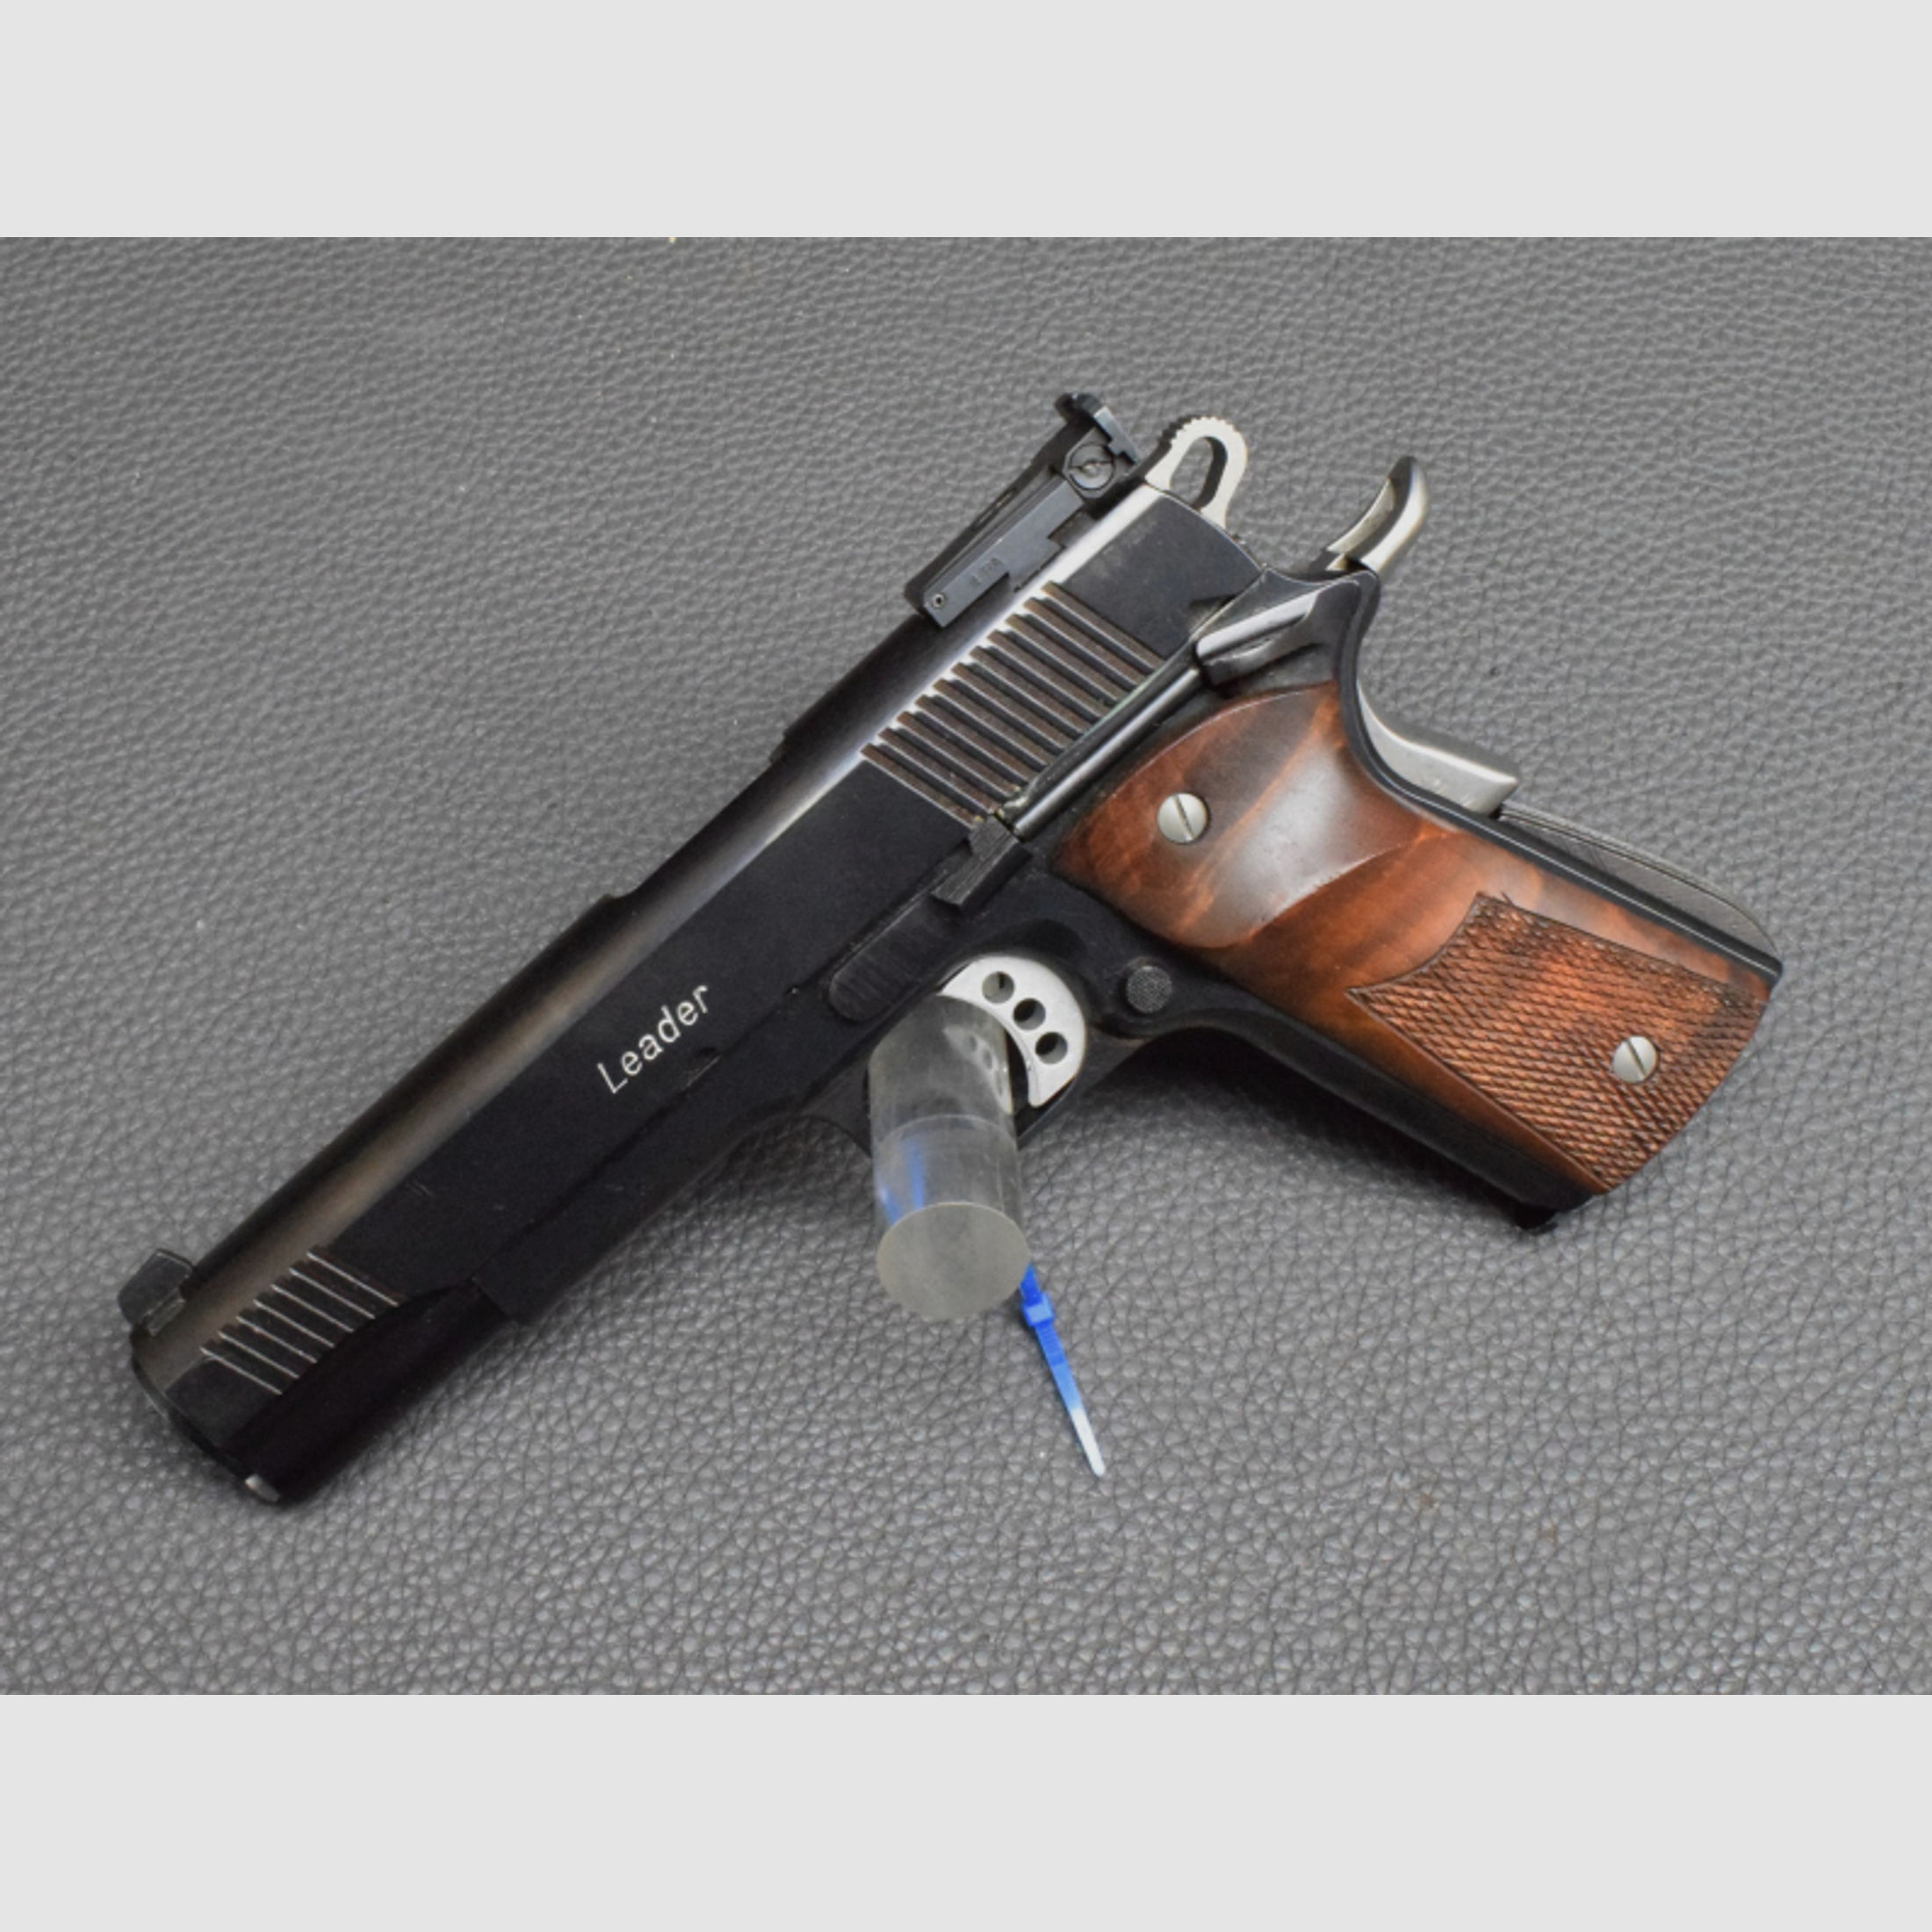 Peters Stahl Pistole Modell 1911, Kaliber 45ACP, sehr gut